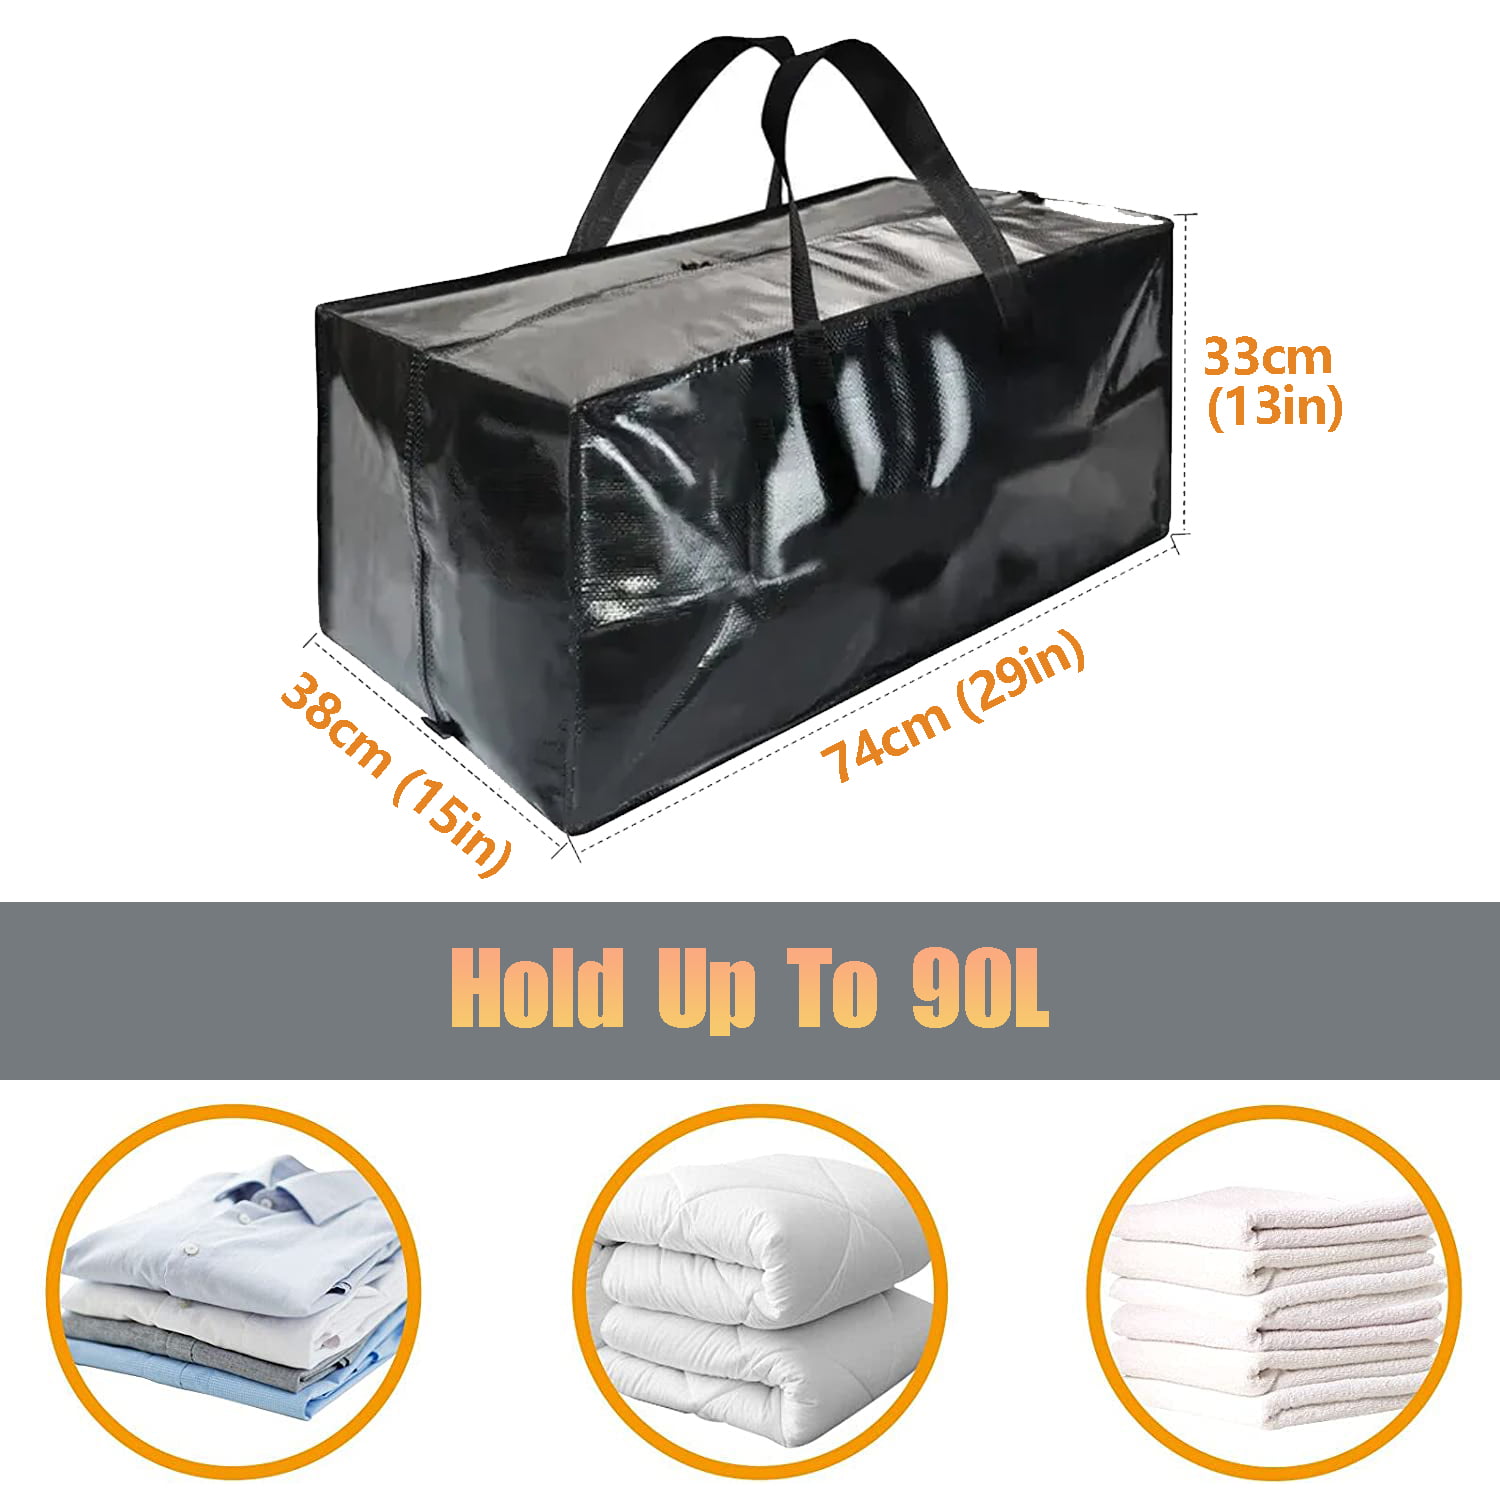 Rihim Moving Bags 90L - 8 Clear Heavy Duty Extra Large Storage Bags for  Clothes - Packing Bags with Backpack Straps Strong Handles Zippers -  College